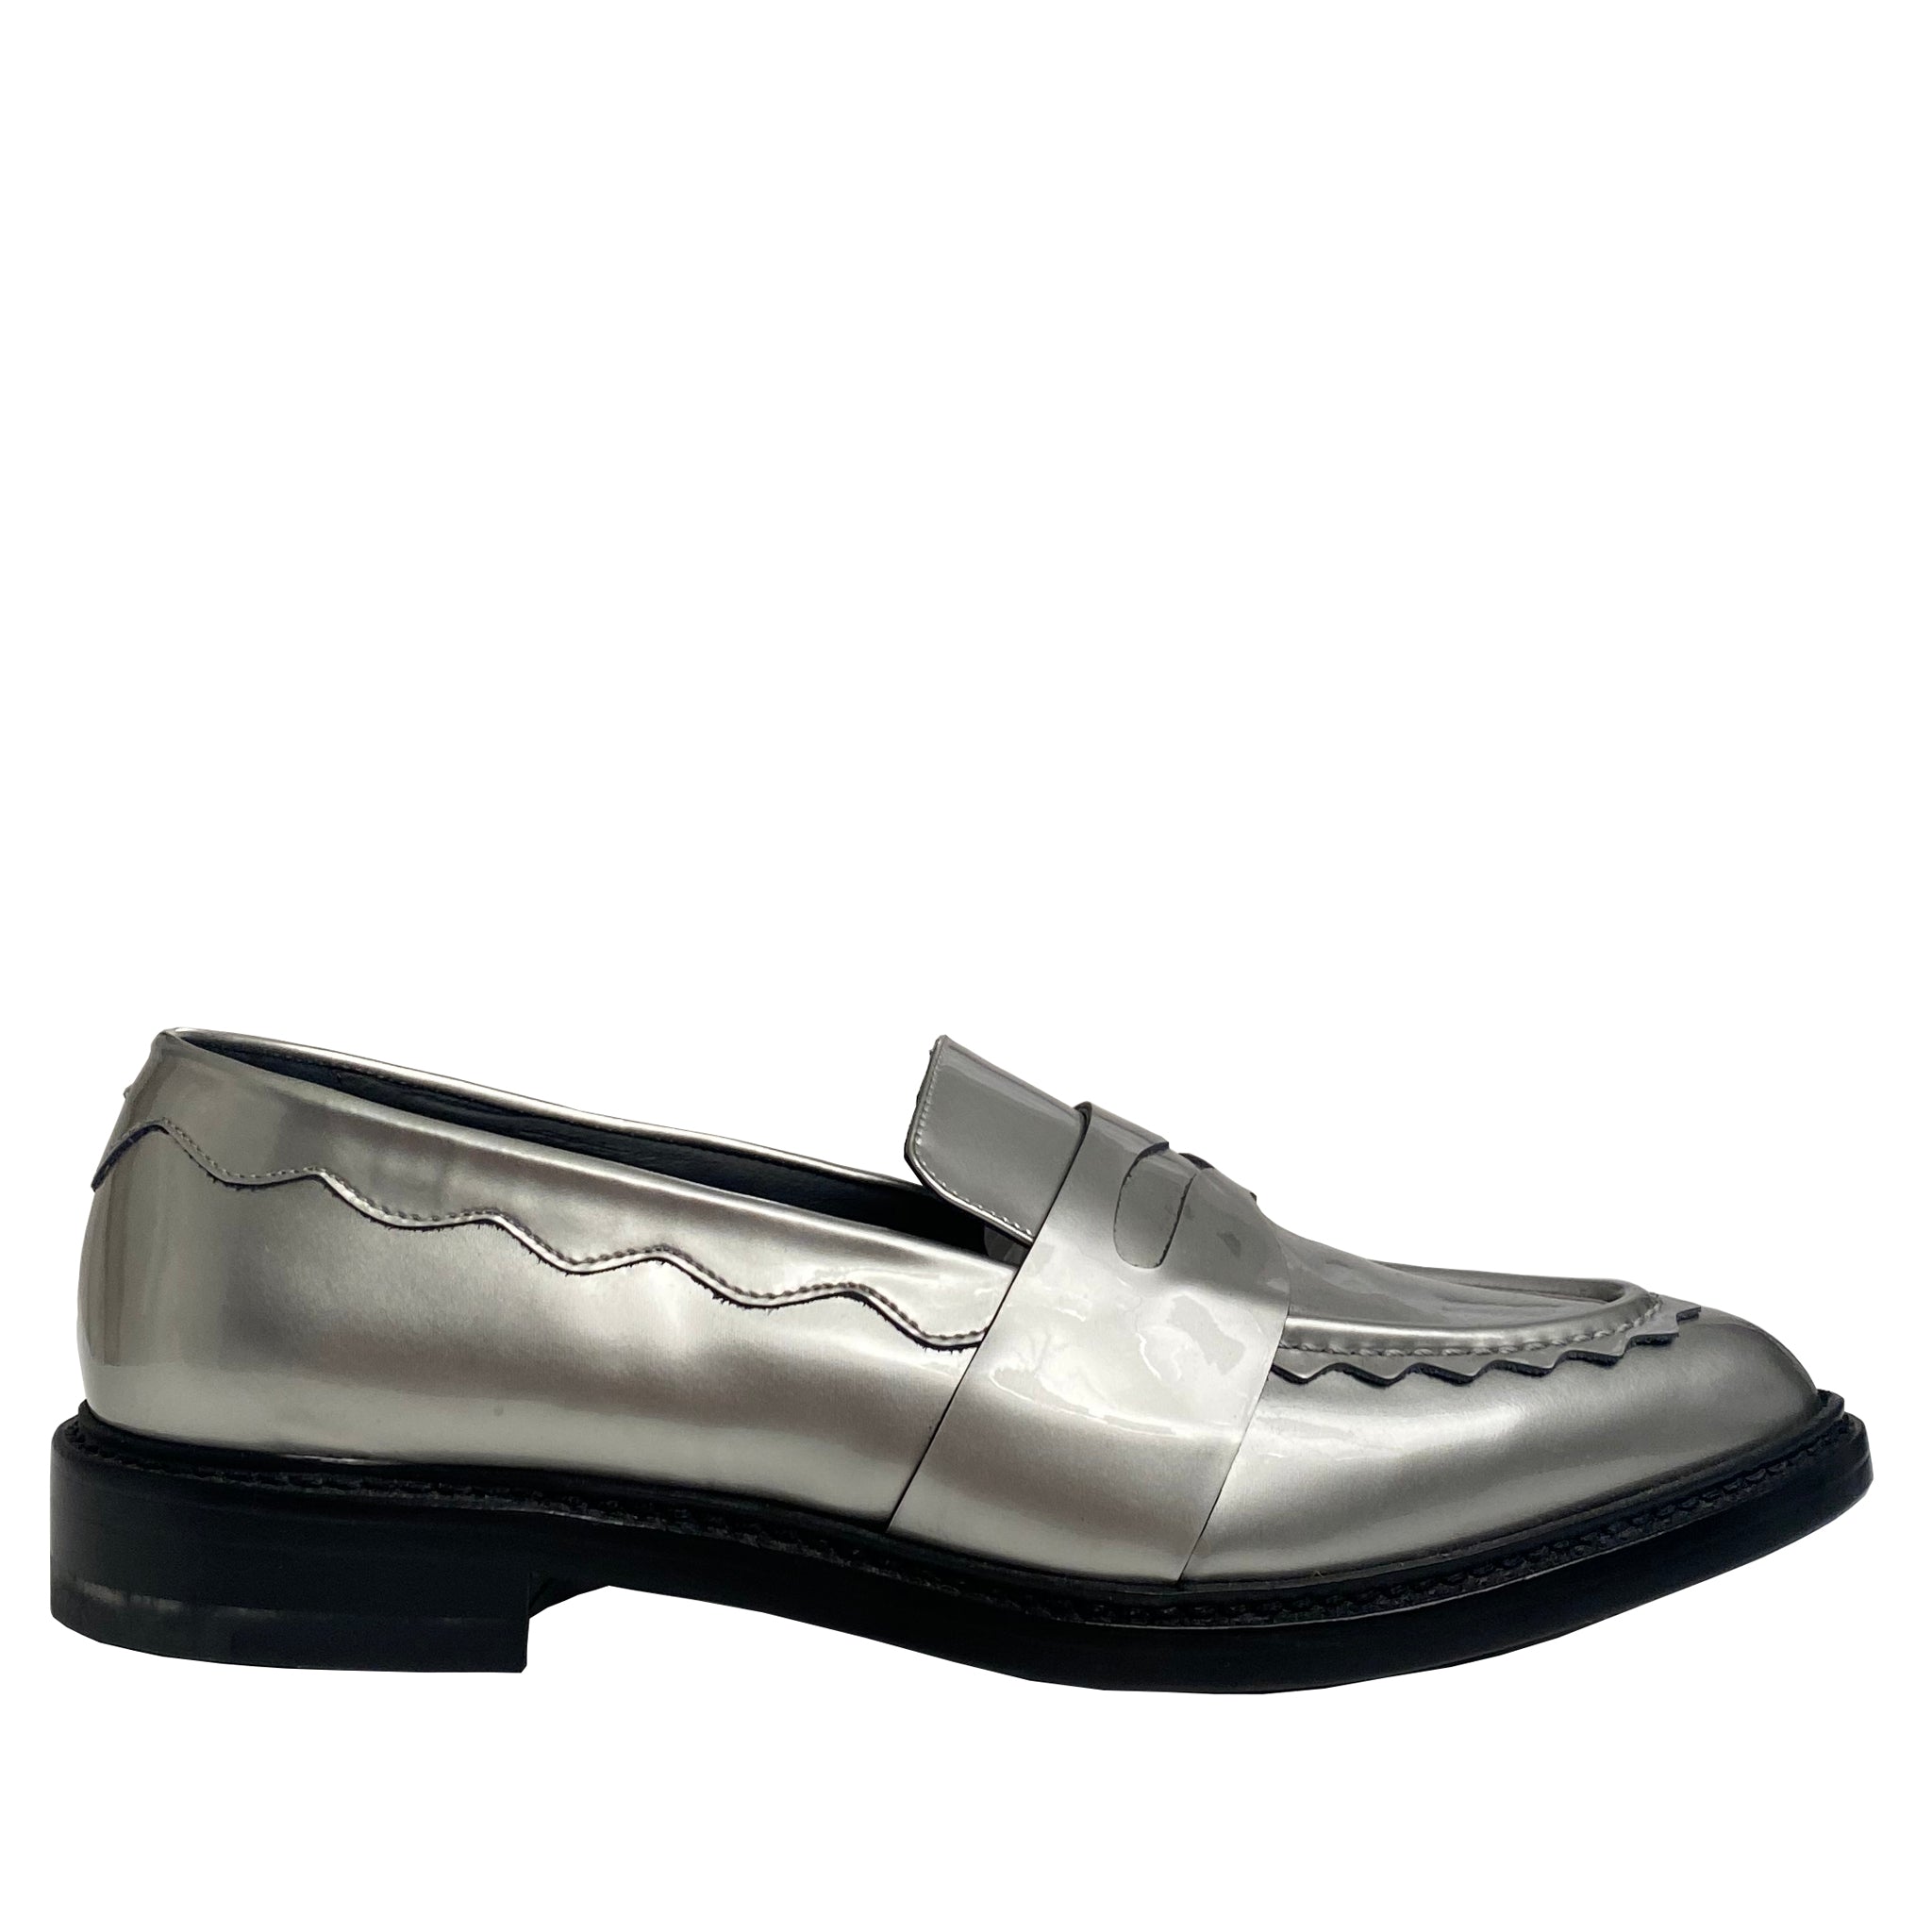 Christopher Kane Loafers